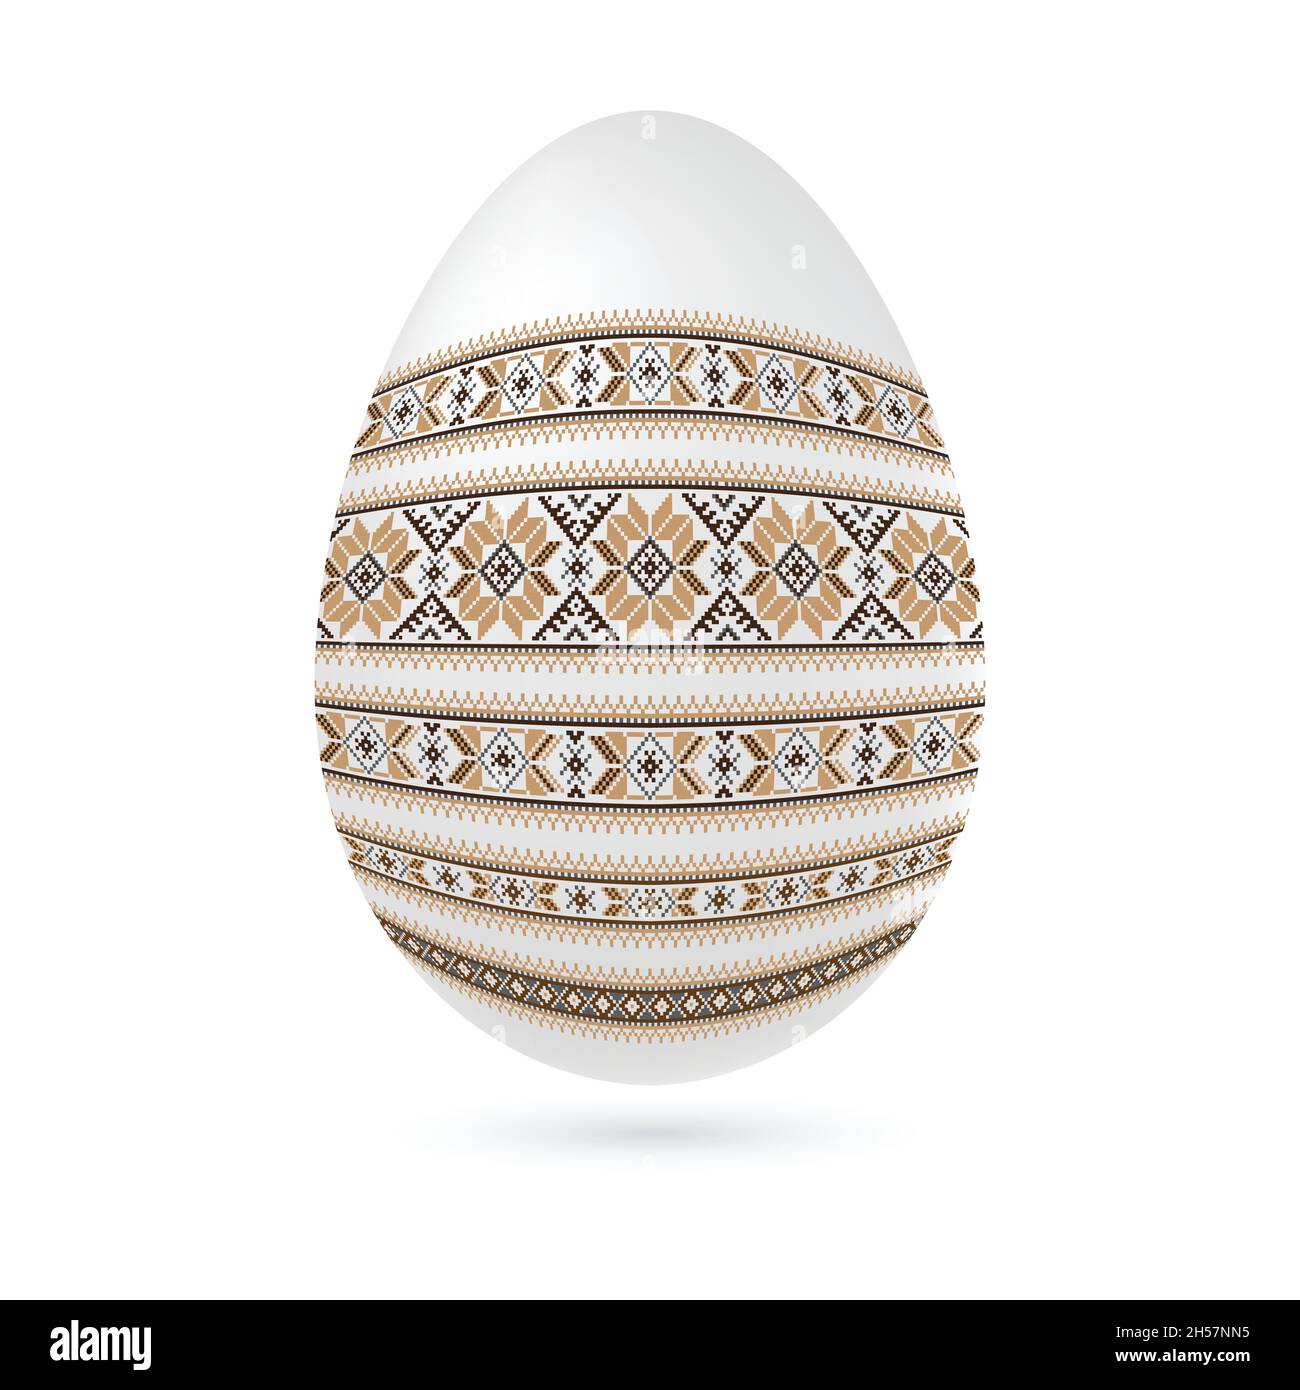 Easter ethnic ornamental egg with cross stitch pattern. Isolated on white background Stock Vector